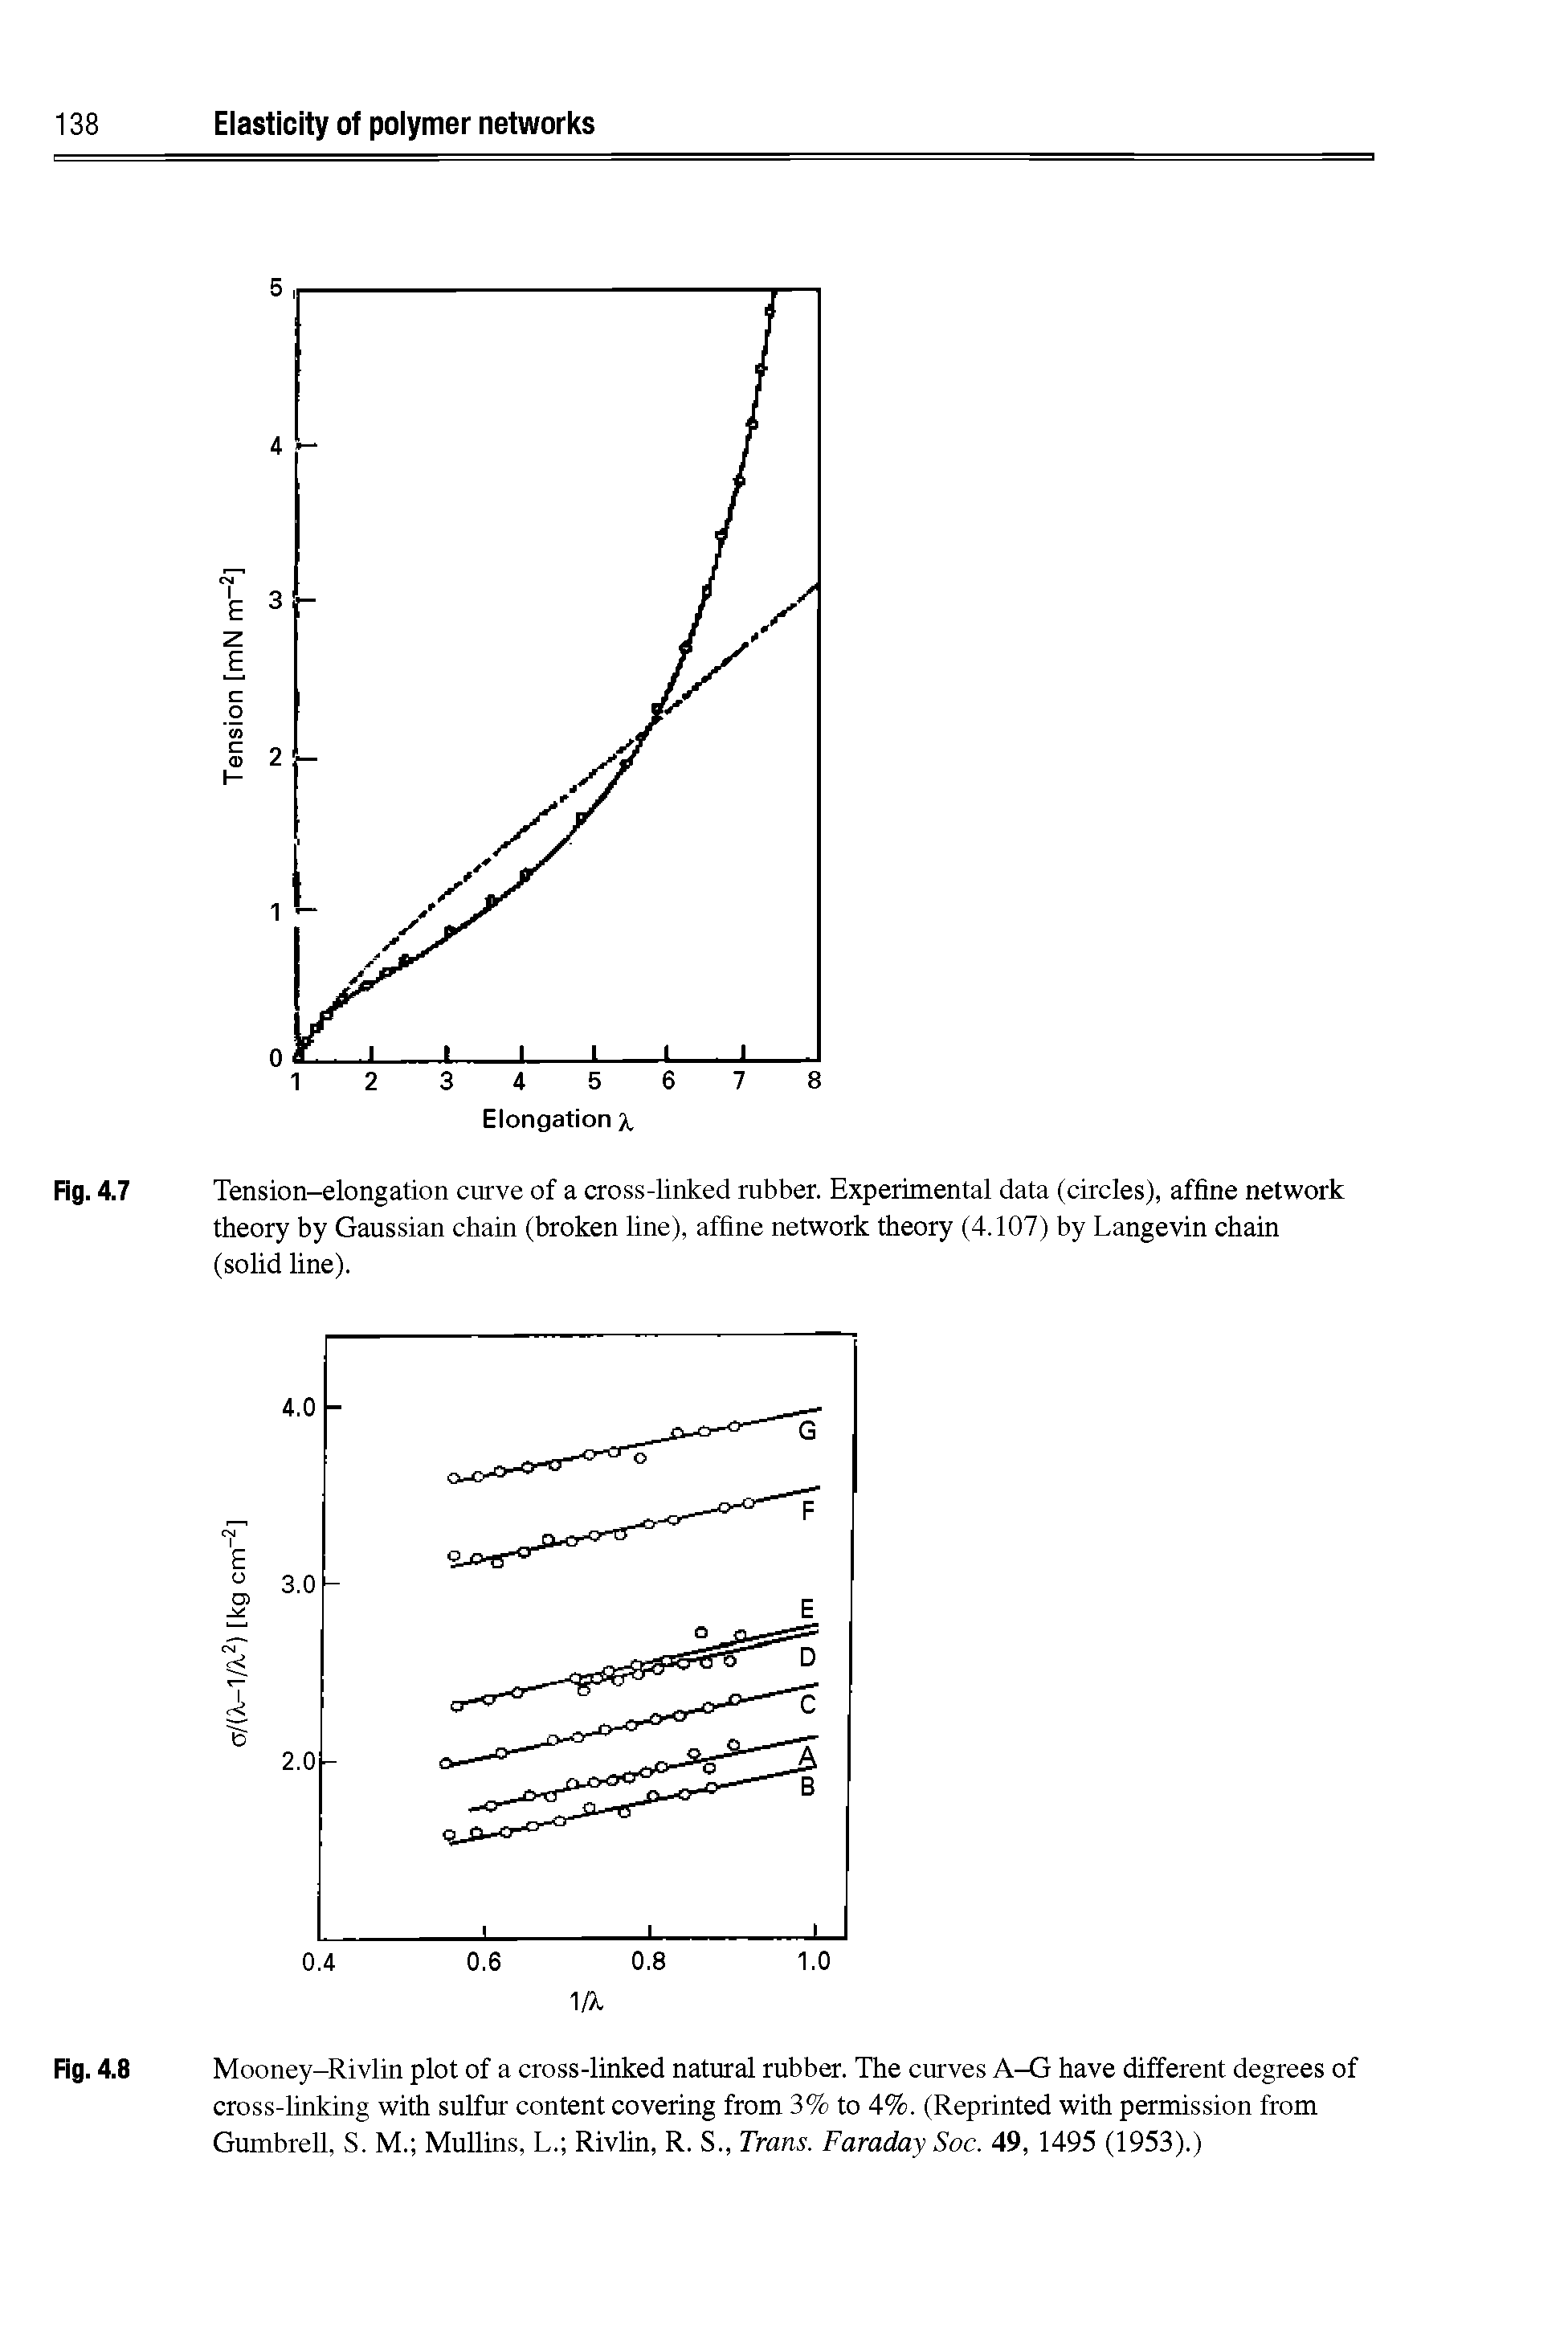 Fig. 4.7 Tension-elongation curve of a cross-linked rubber. Experimental data (circles), affine network theory by Gaussian chain (broken line), affine network theory (4.107) by Langevin chain (solid line).